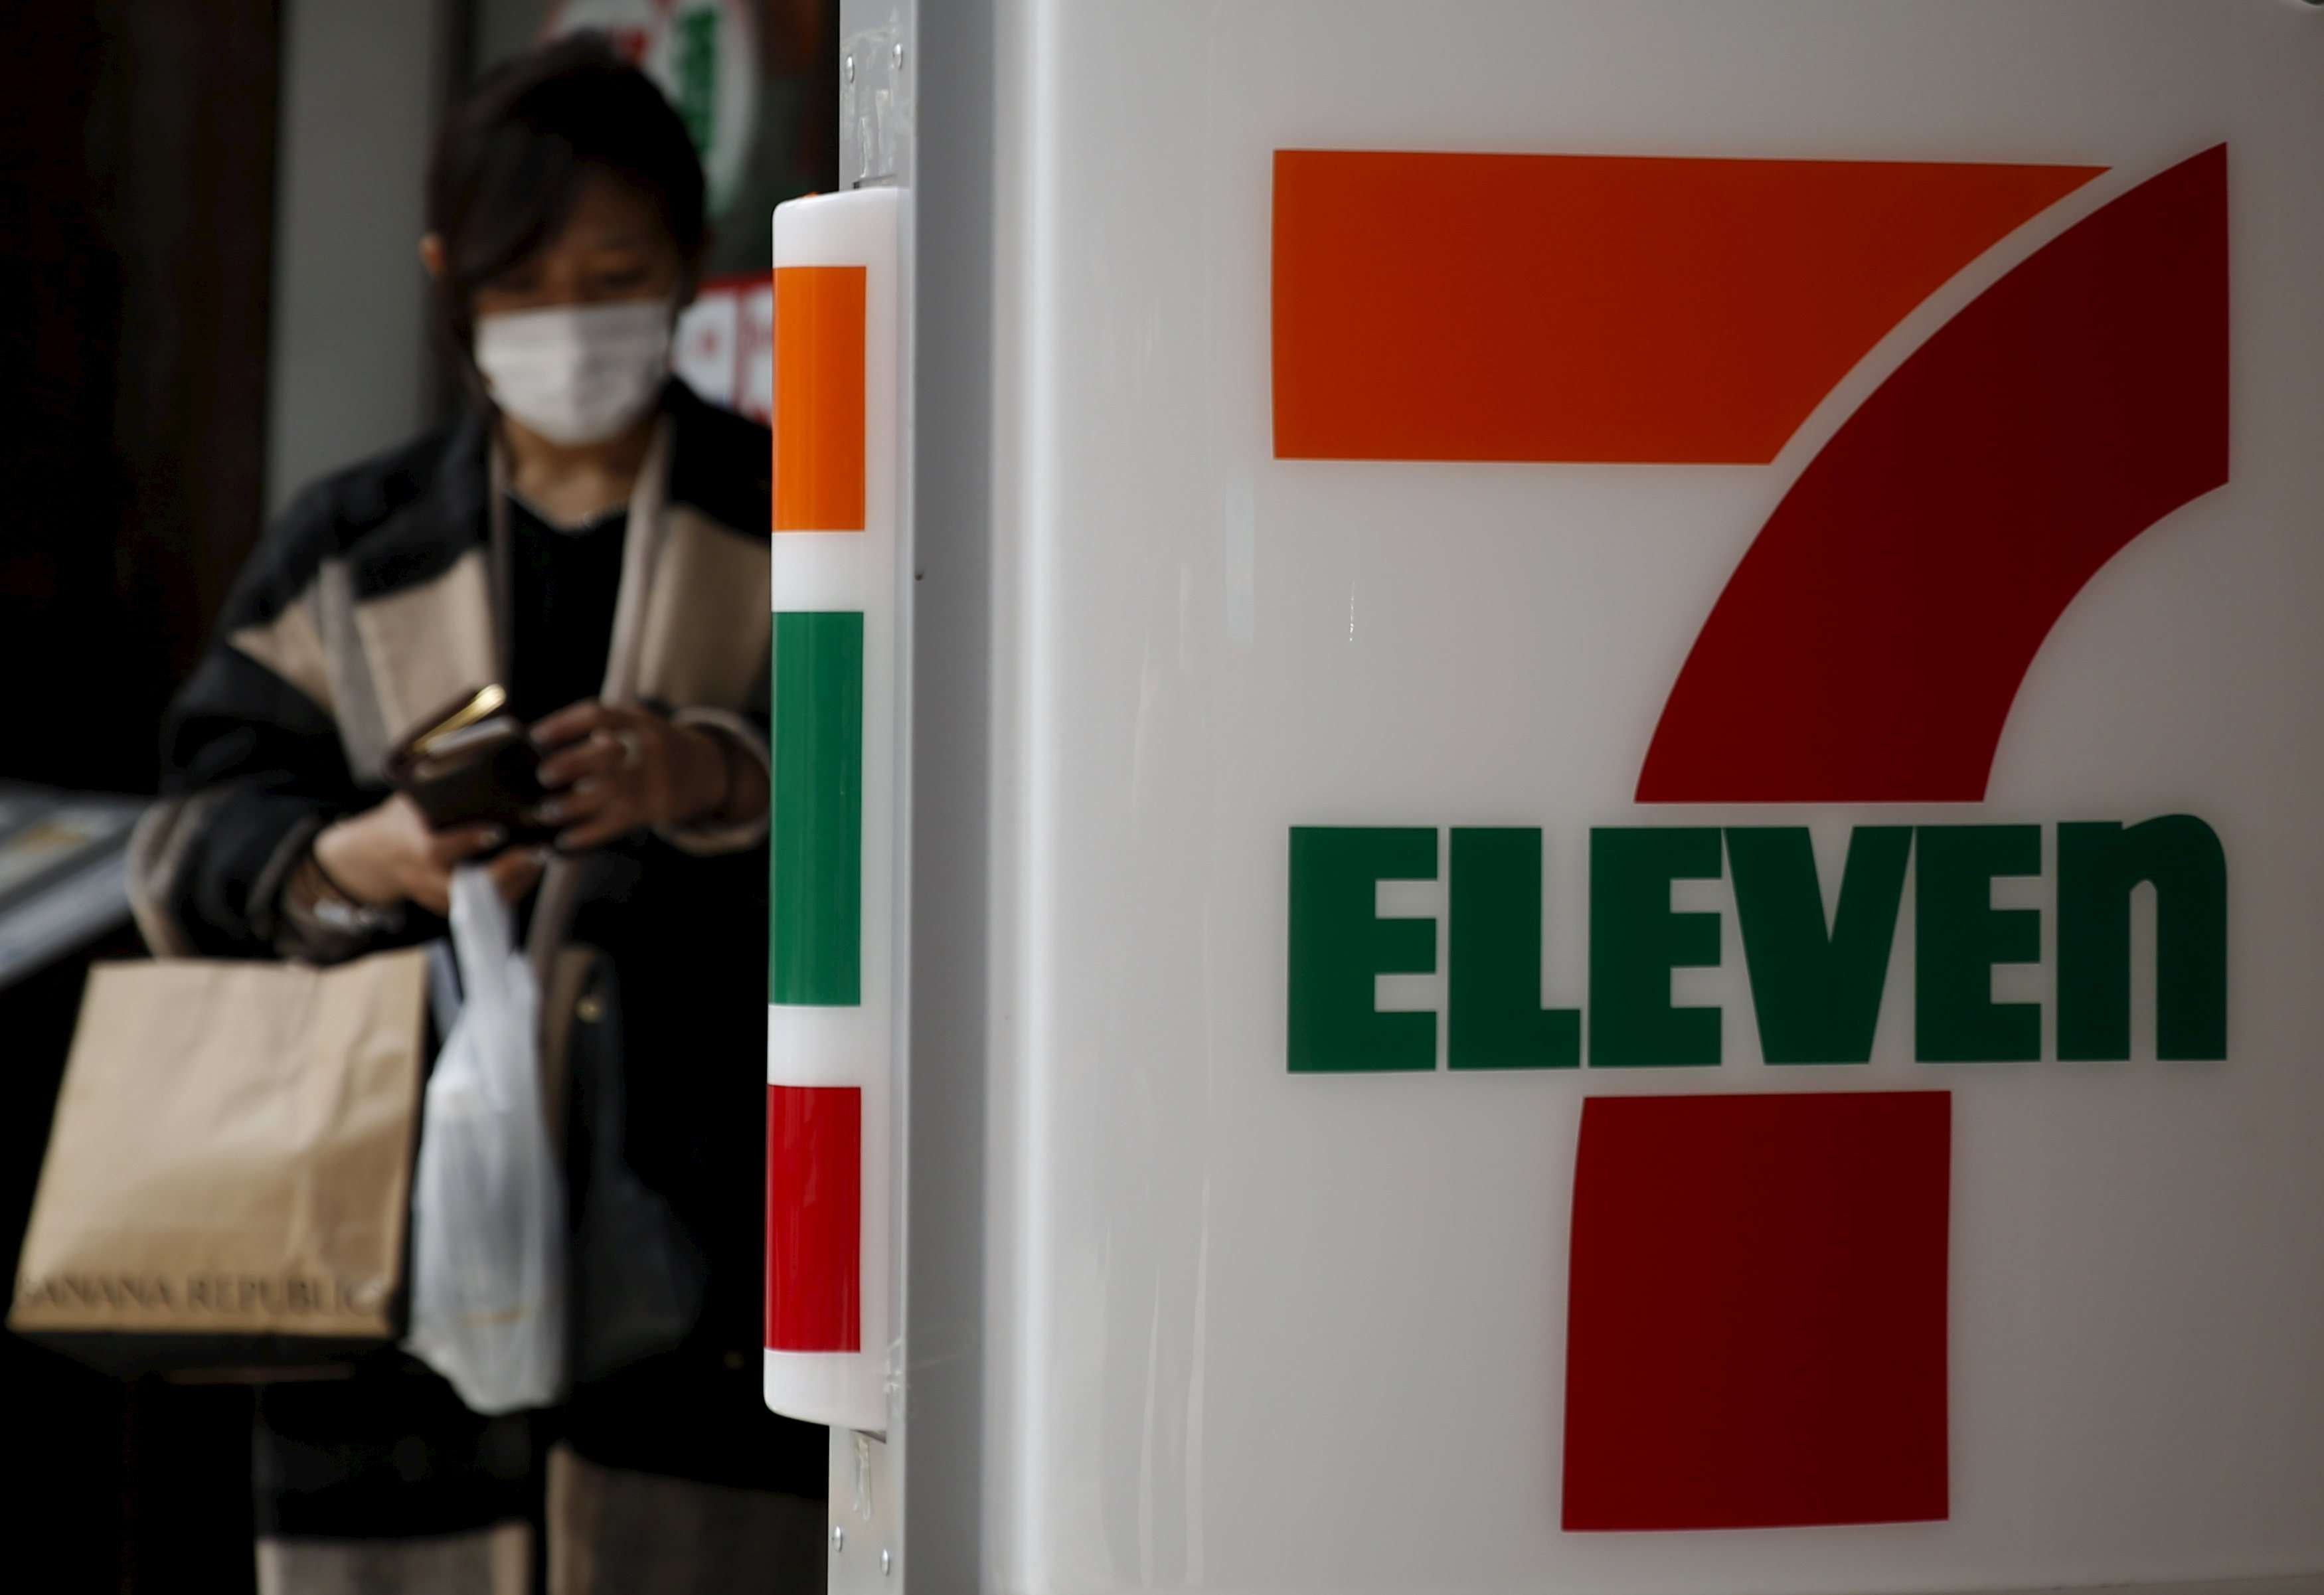 Different results could emerge from the hypothetical 7-Eleven case depending on the circumstances. Photo: Reuters